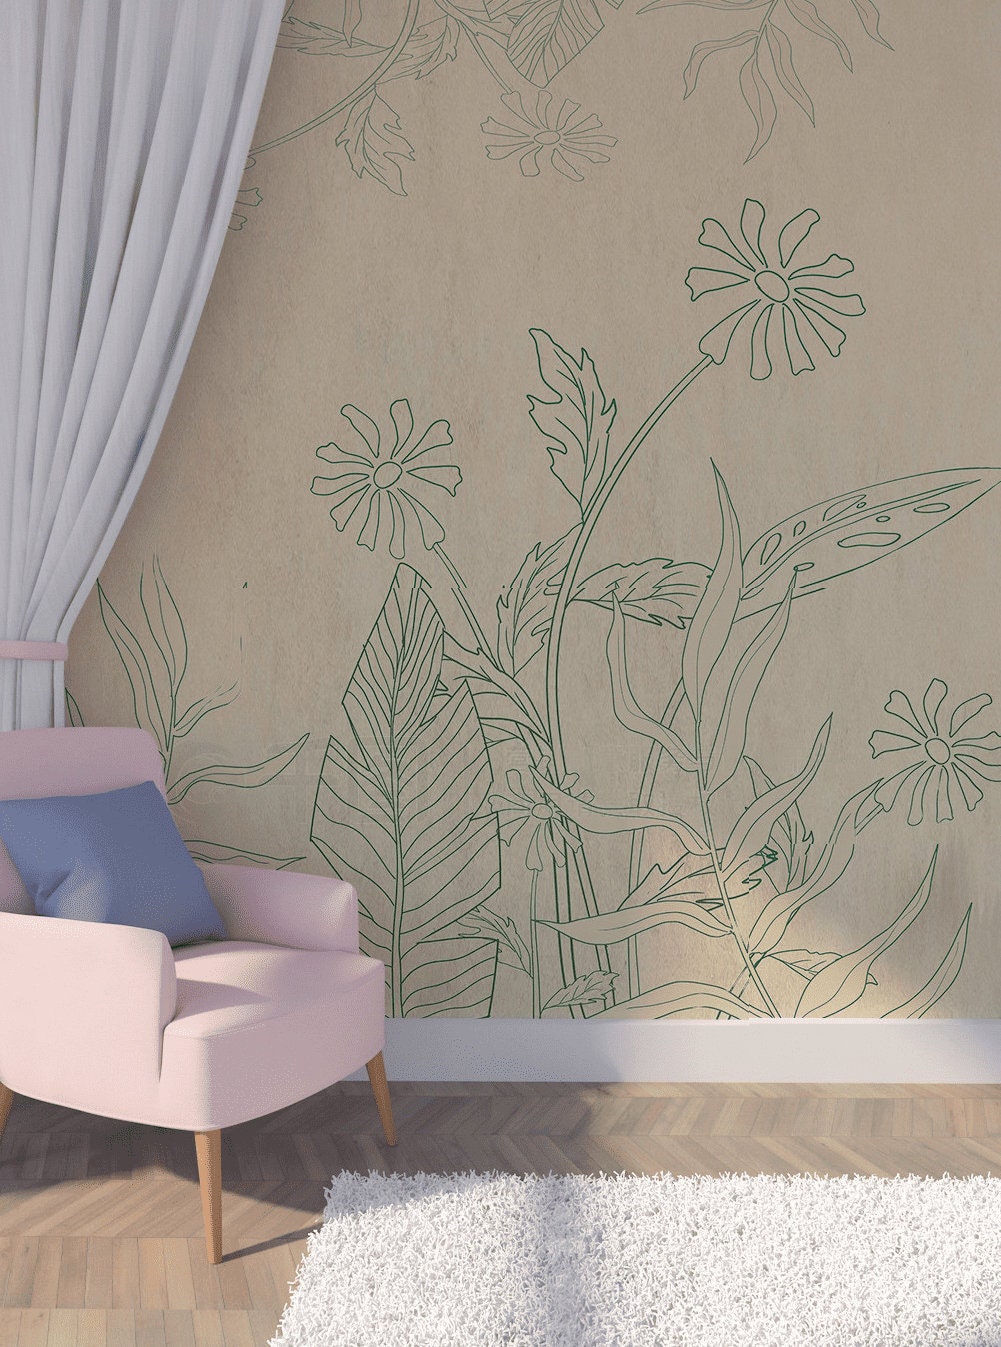 Herb wallpaper peel and stick wall mural, leaf wallpaper, mural leaves, removable wallpaper, bedroom wall decoration